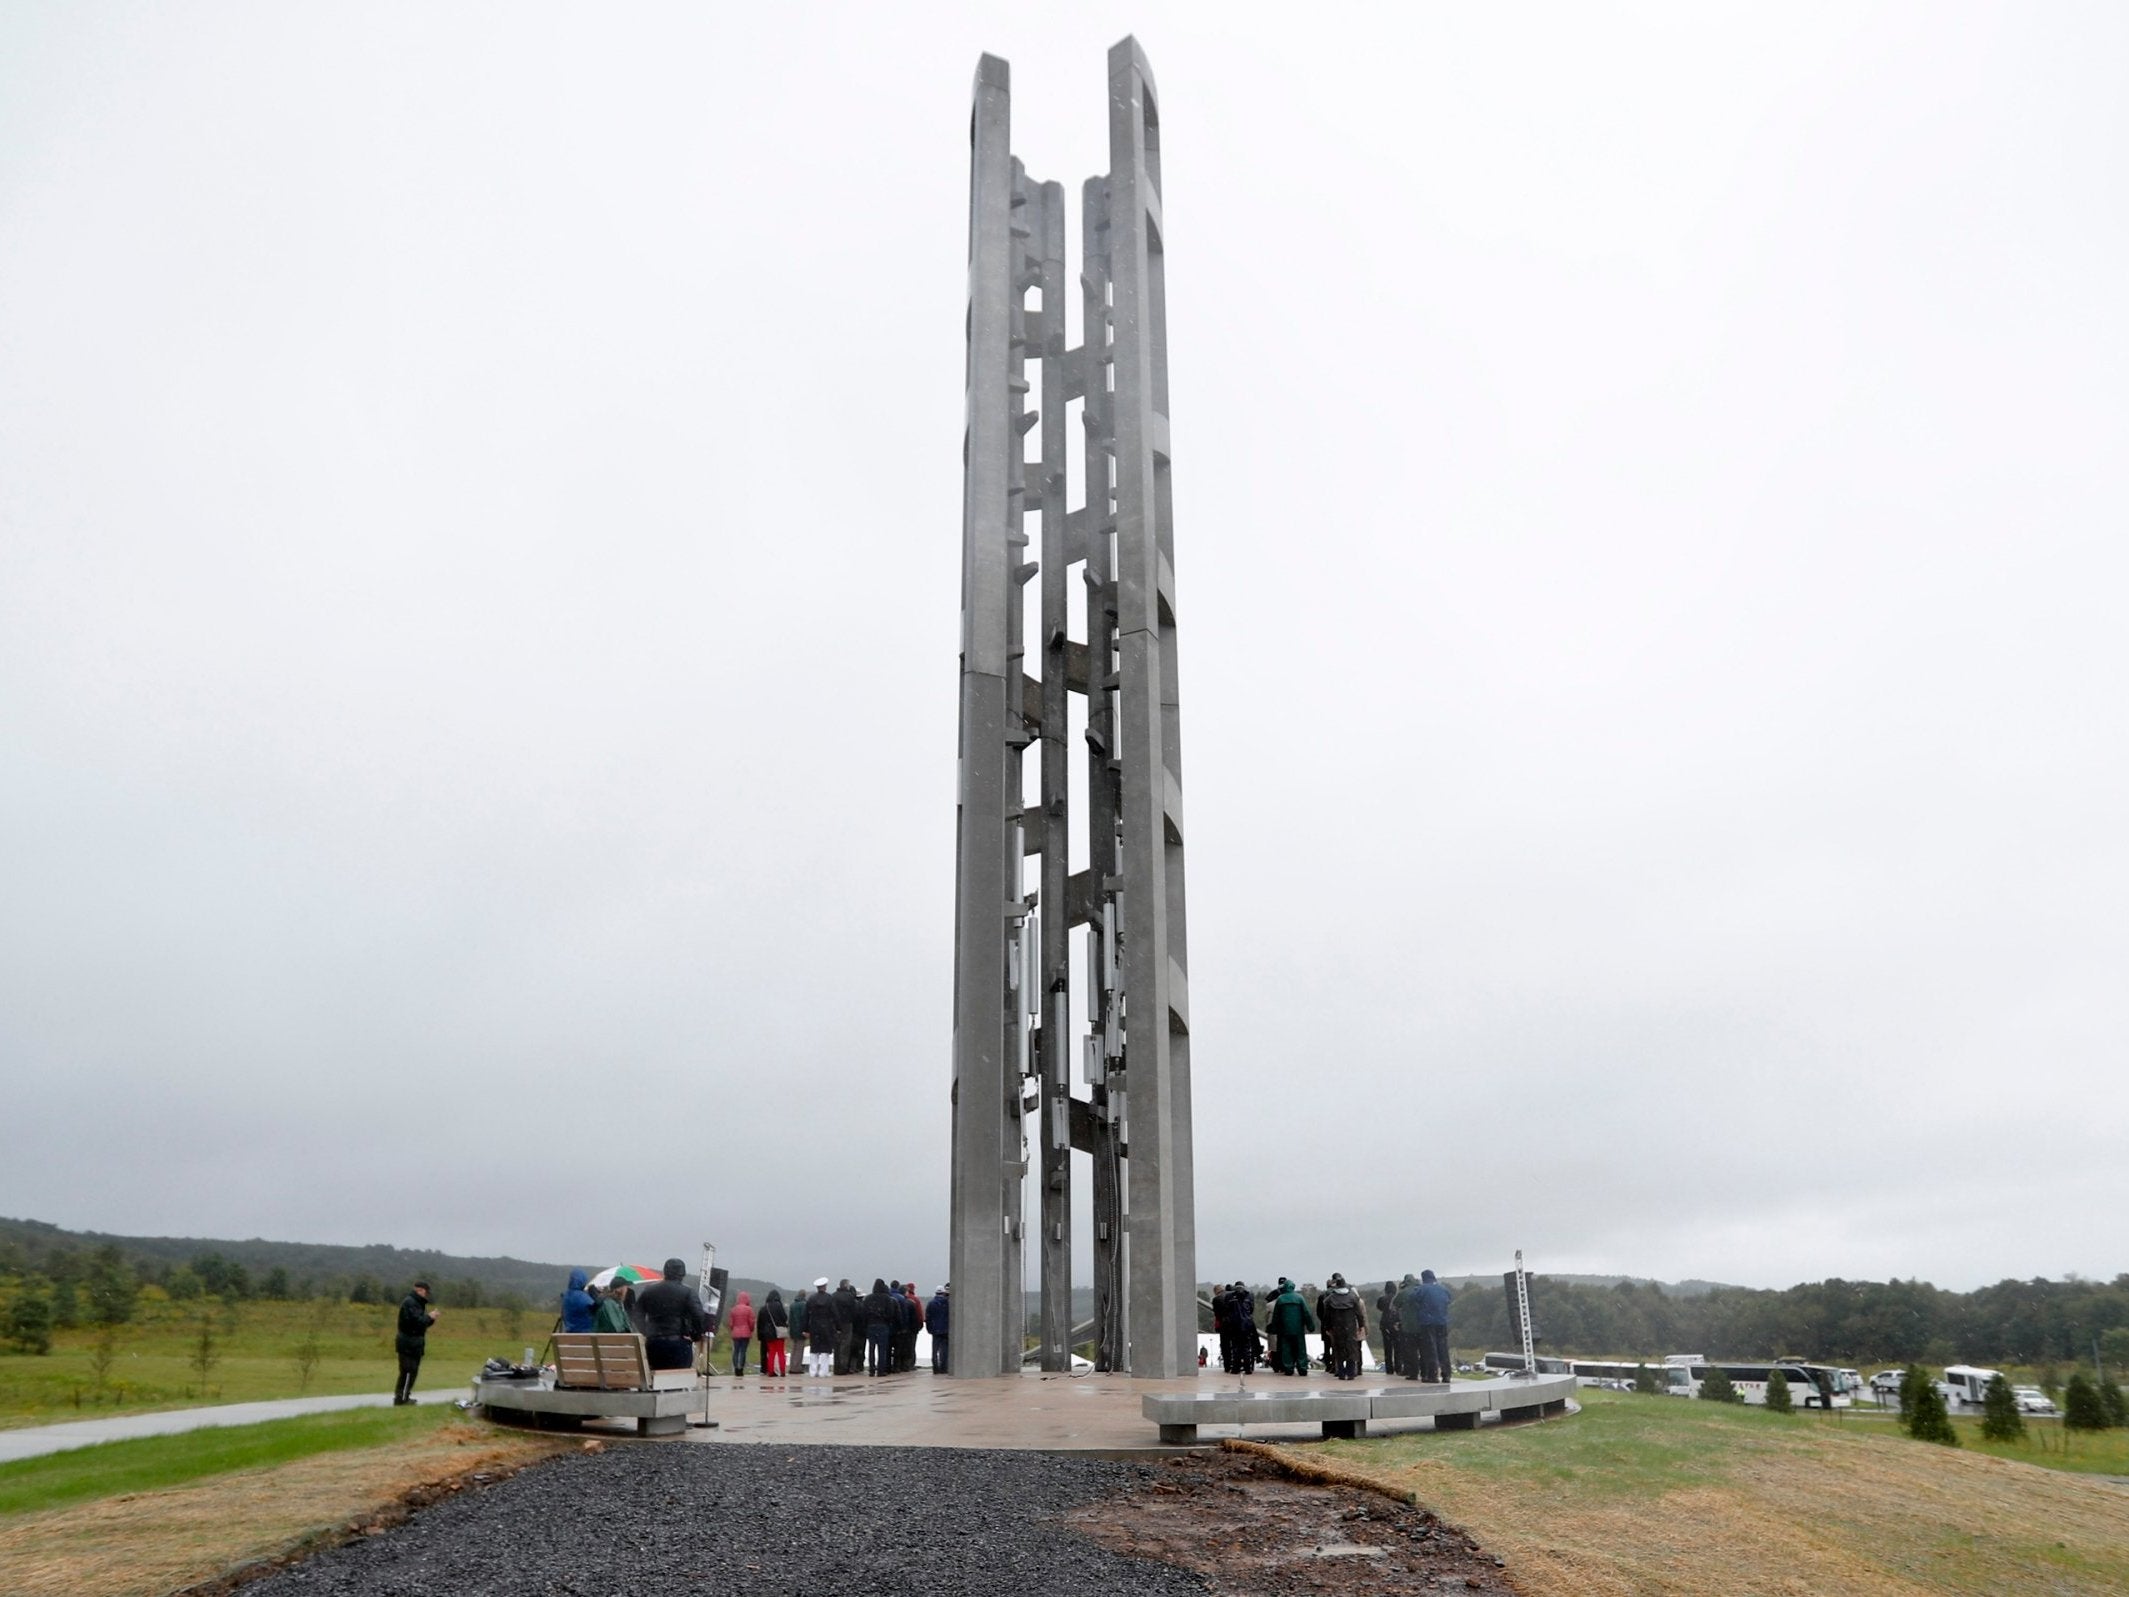 The 93-foot tall Tower of Voices at the Flight 93 National Memorial in Shanksville